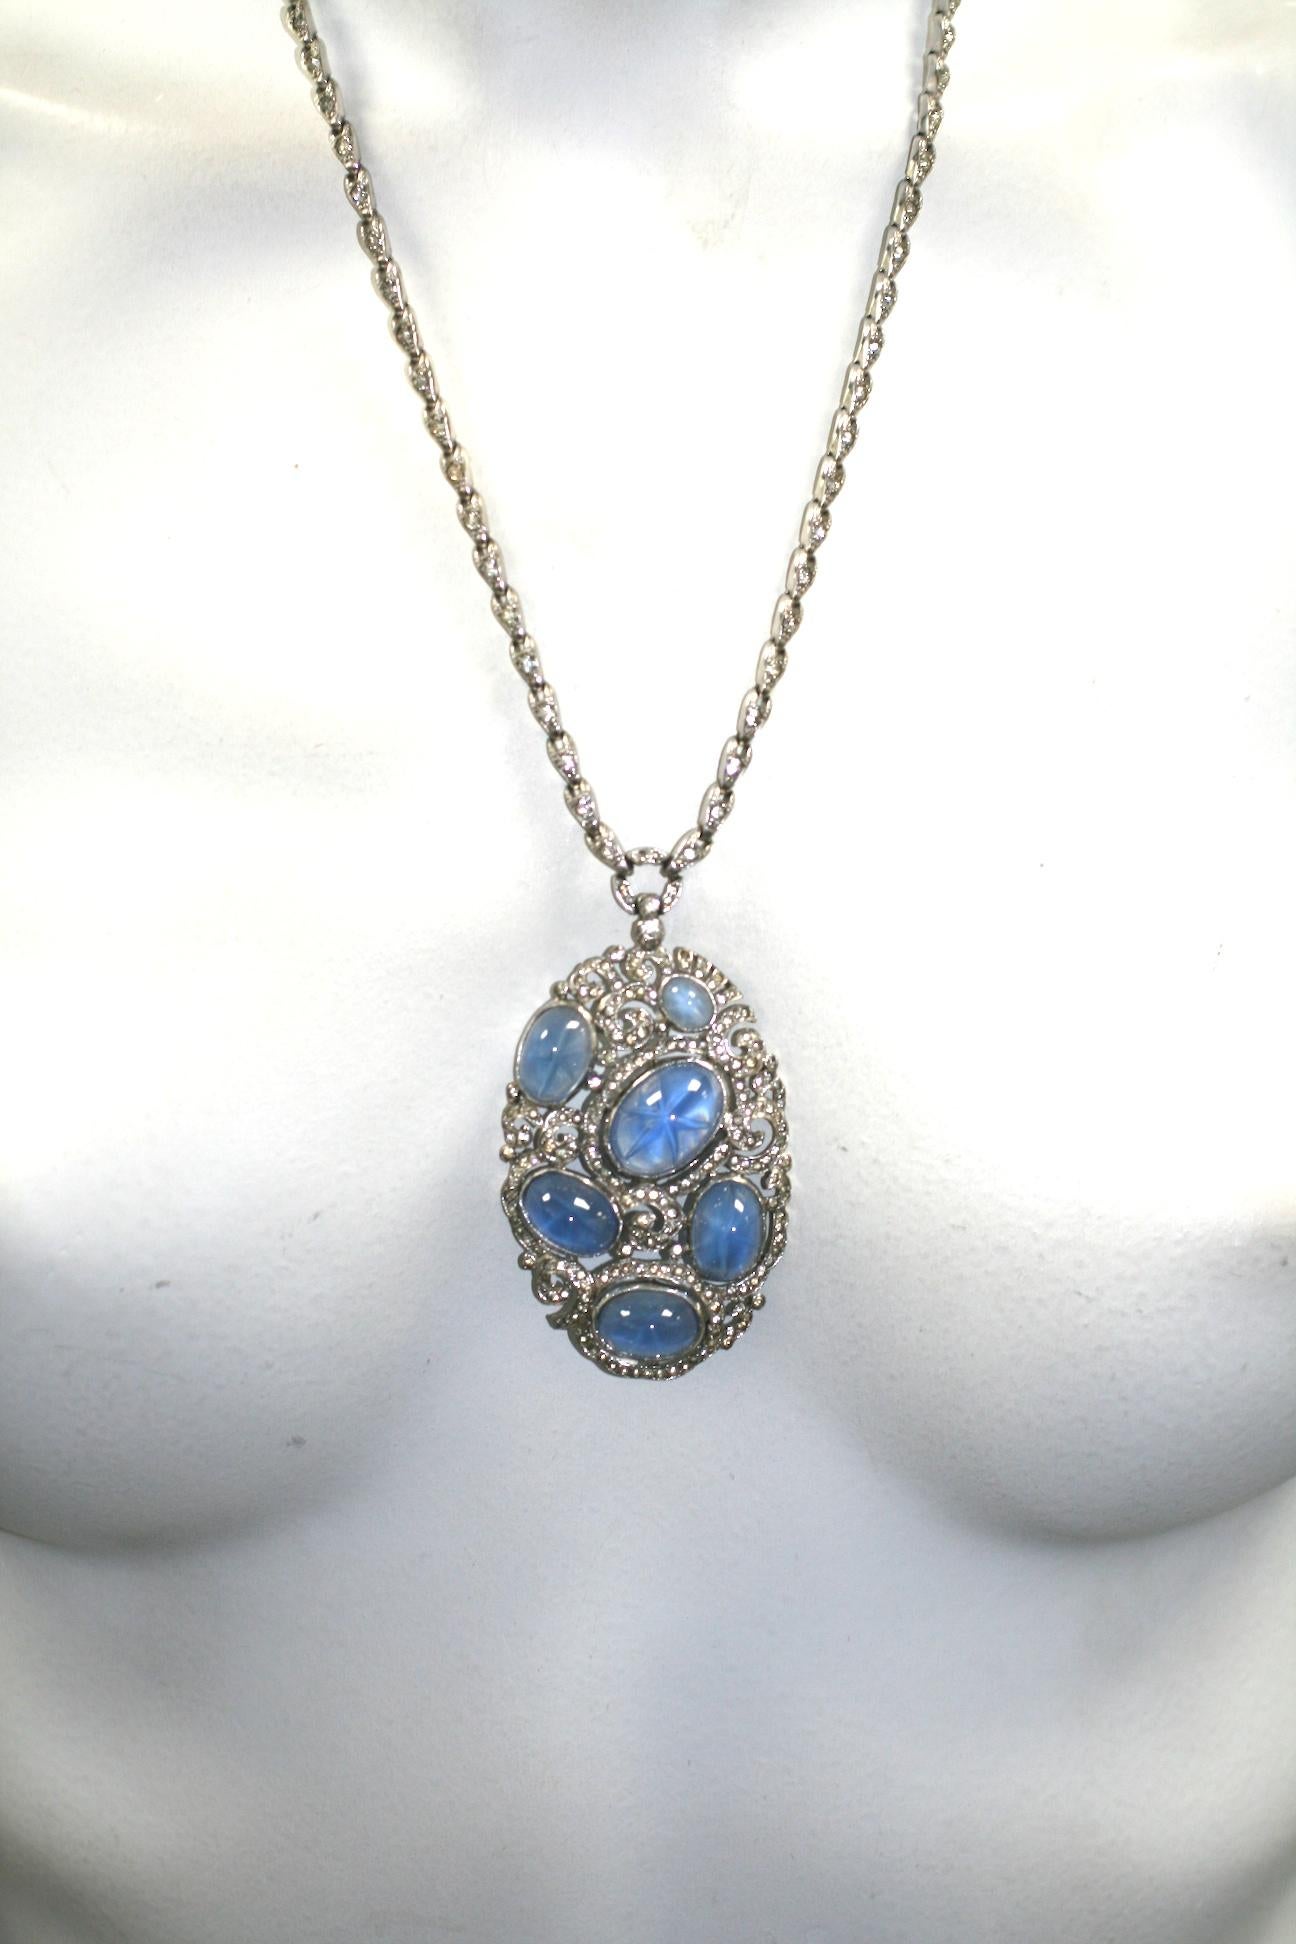 Rare Edwardian Style Early Trifari KTF Star Sapphire Art Deco Necklace For Sale 1